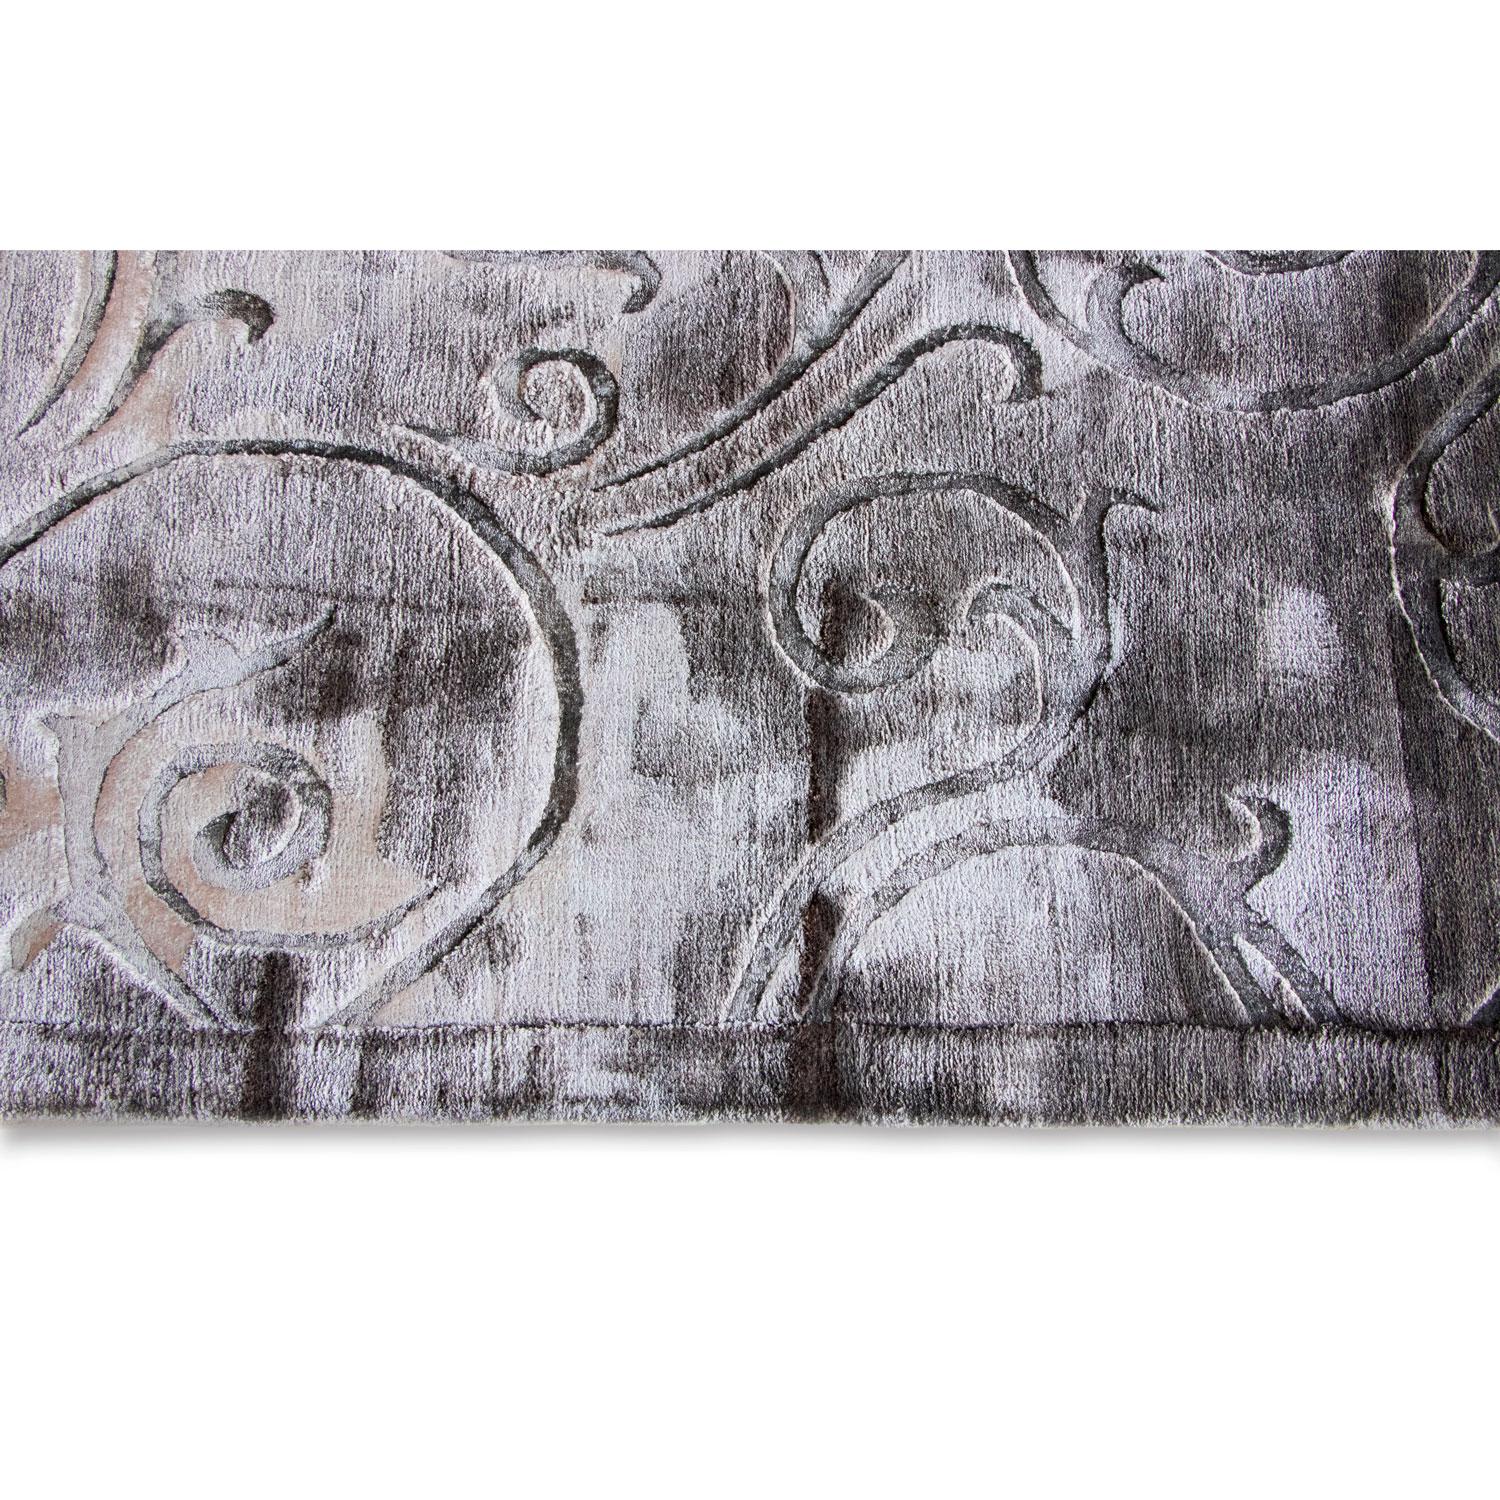 Modern 21 Cent Soft Grey Floral Drawings Rug by Deanna Comellini In Stock 170x240 cm For Sale